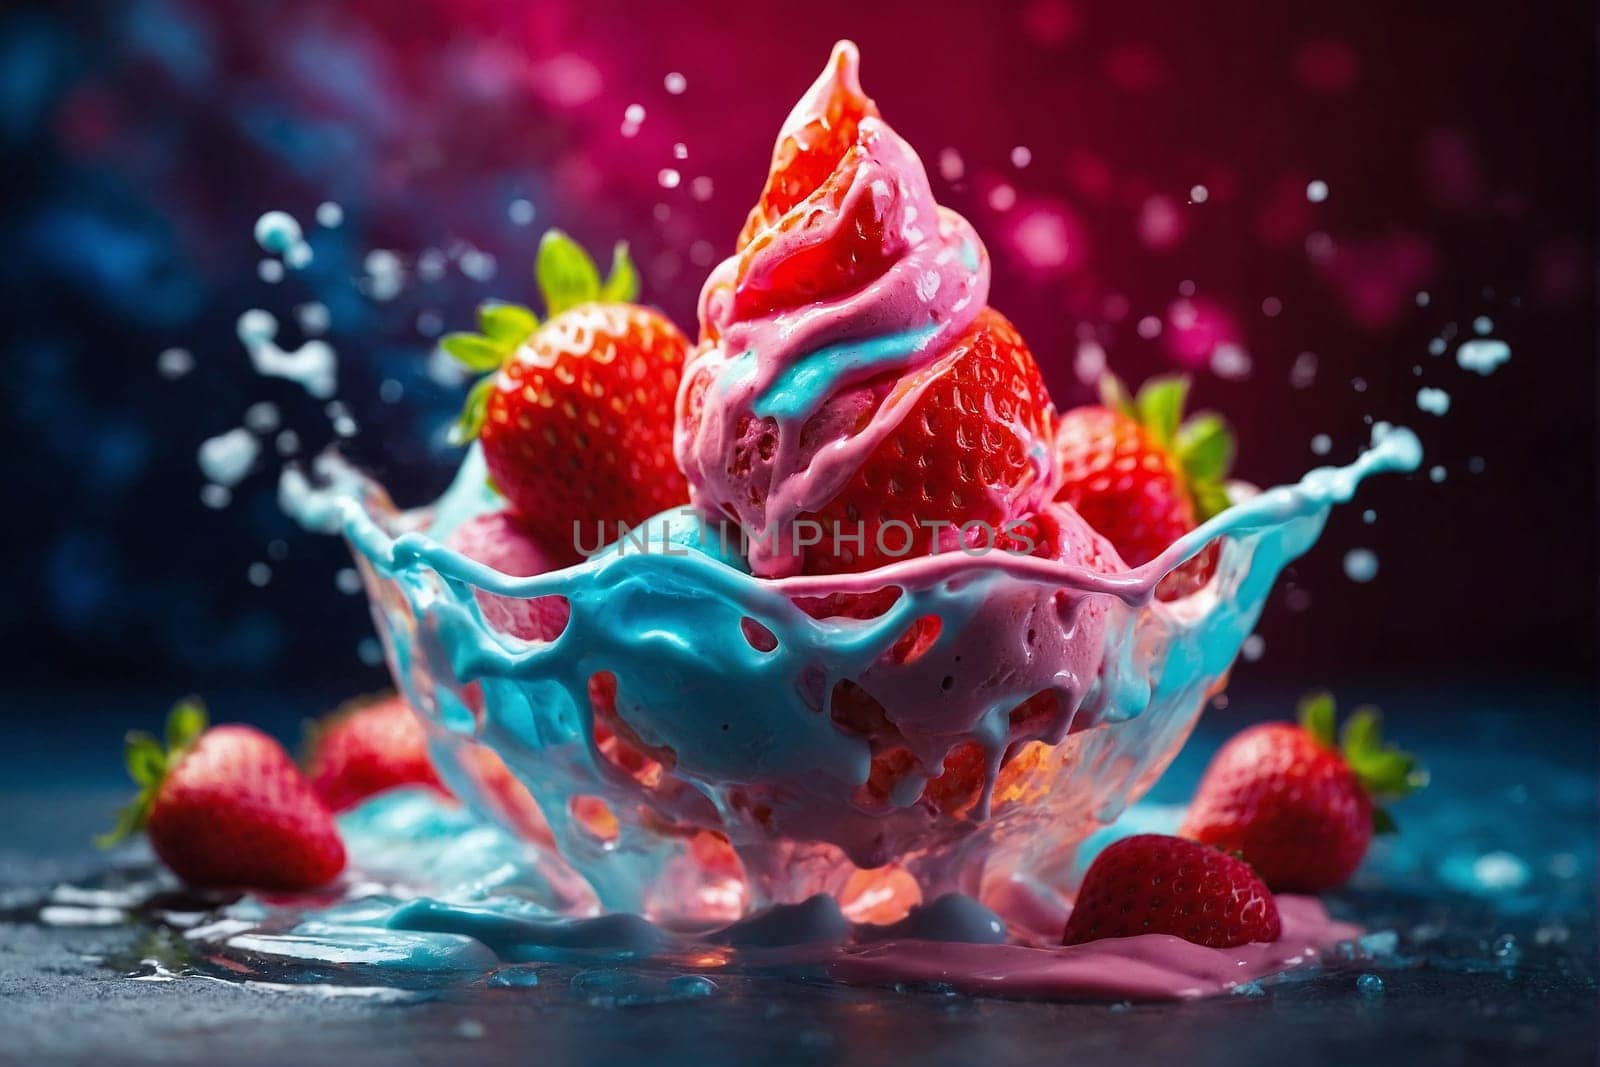 Multiple strawberries are shown mid-air, splashing into a bowl filled with blue and pink colored liquid.